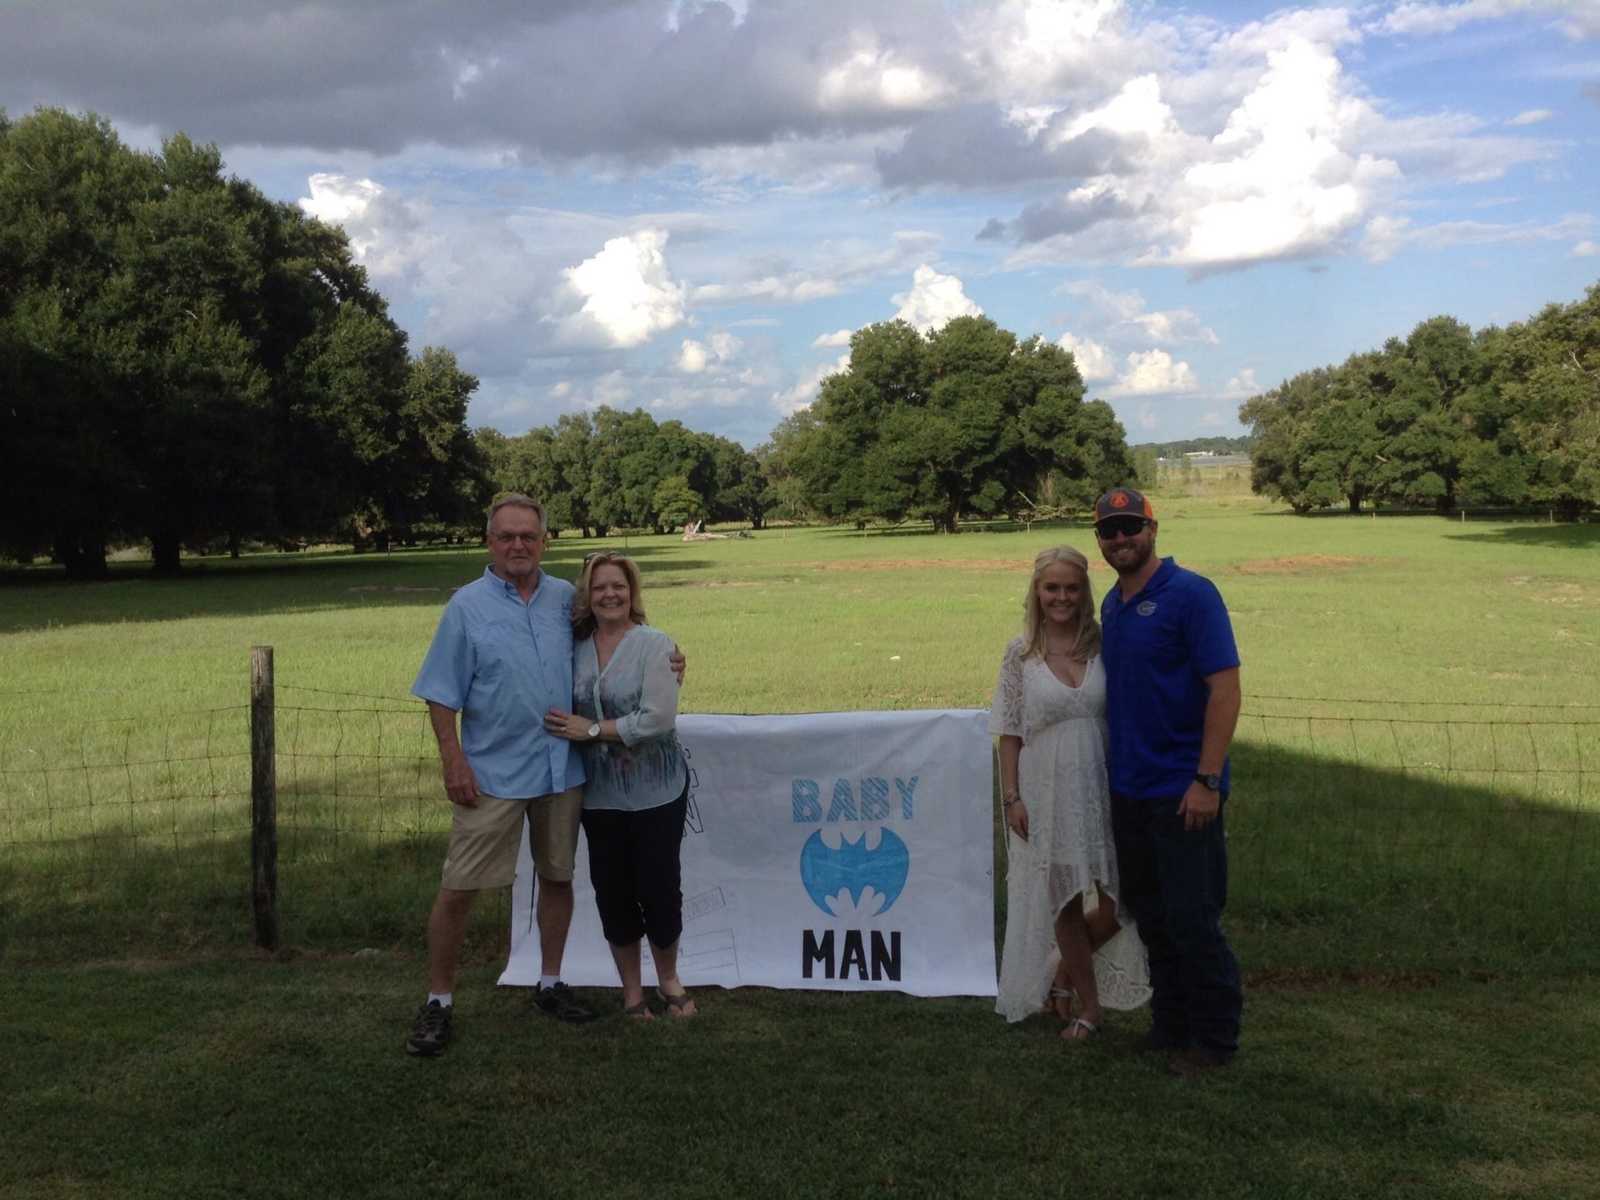 white sign hanging on wire fence that says, "baby man" with batman logo and an older and younger couple on either side